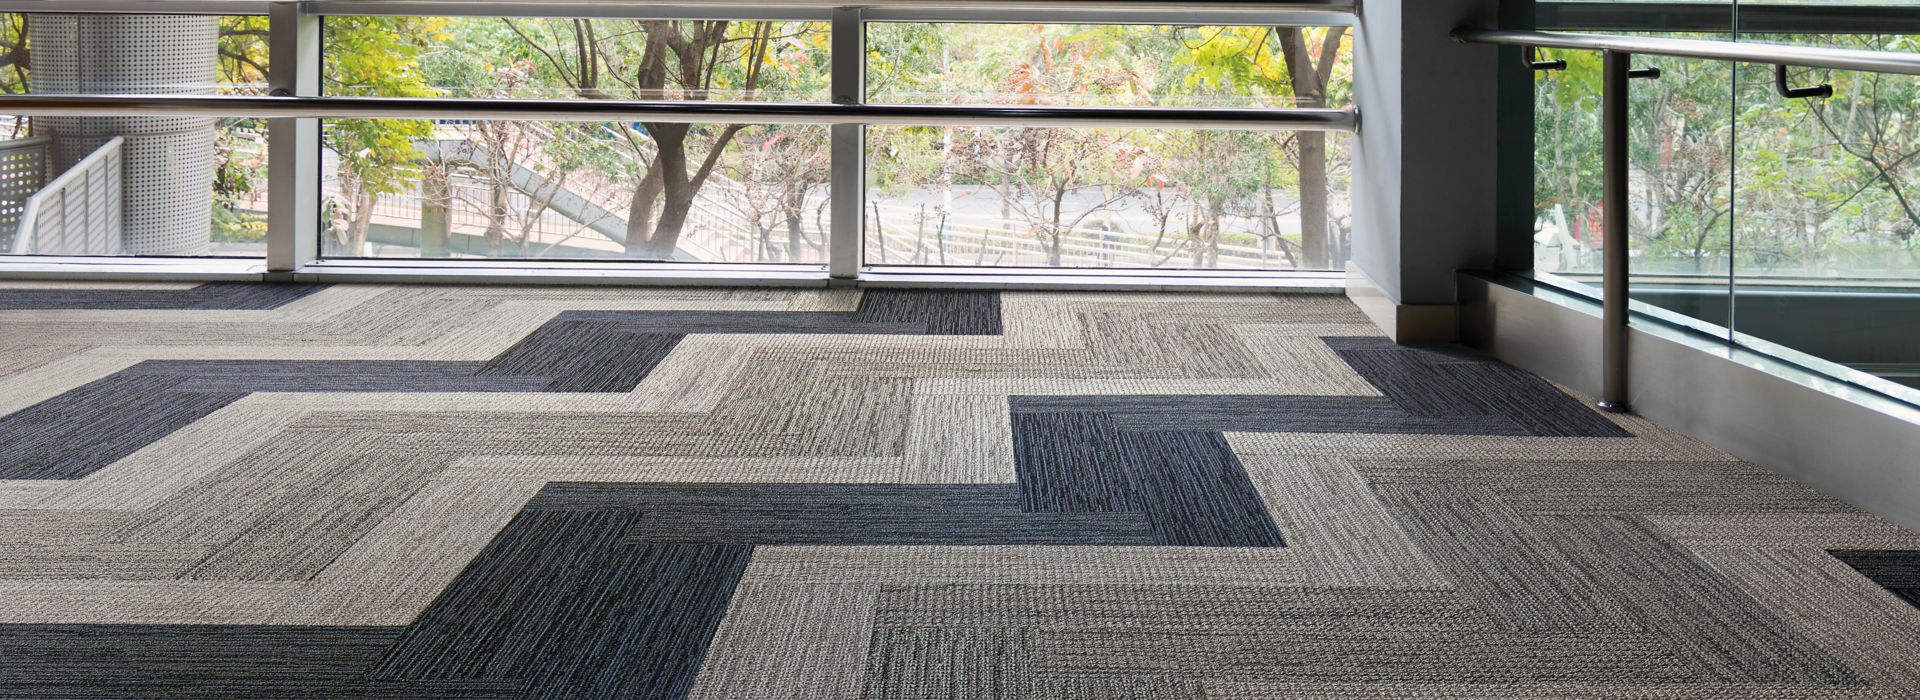 Interface Afternoon Light and Winter Sun carpet tile in open area with glass walls image number 1